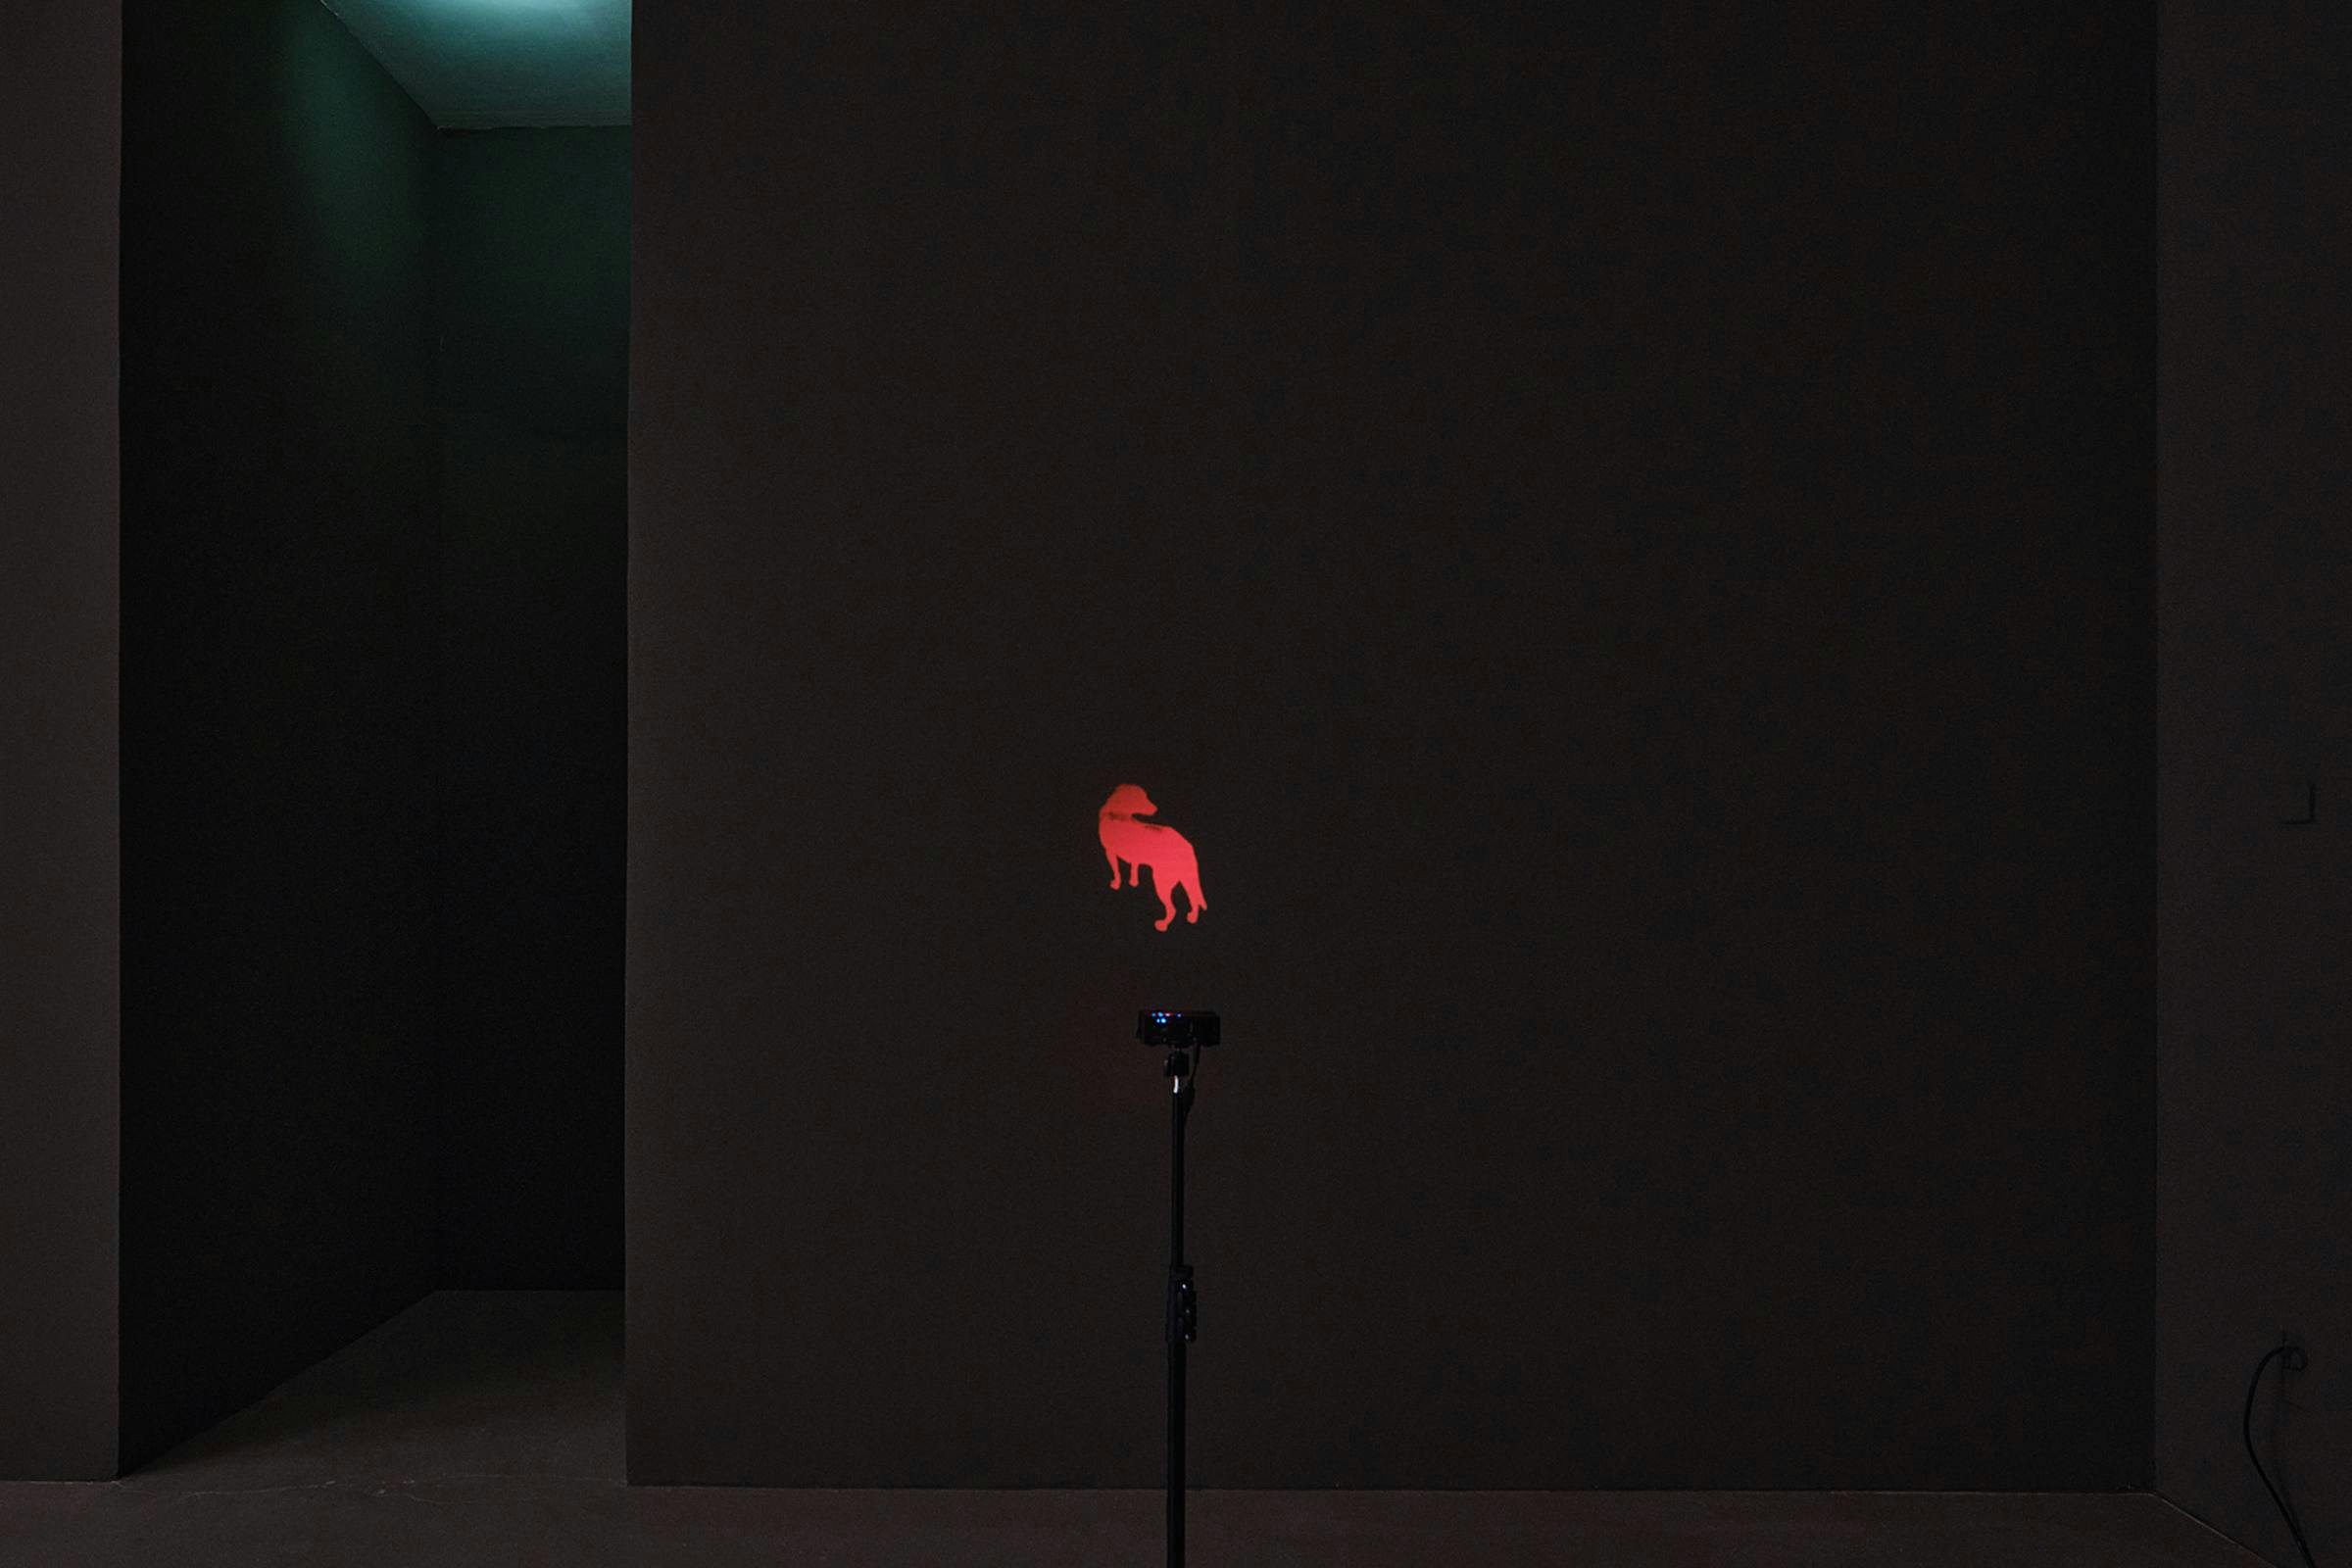 installation view of The Palace (Pipittapan Tee Taipei) in a darkened space. The projected image is that of a red dog. We can see the projector in the foreground